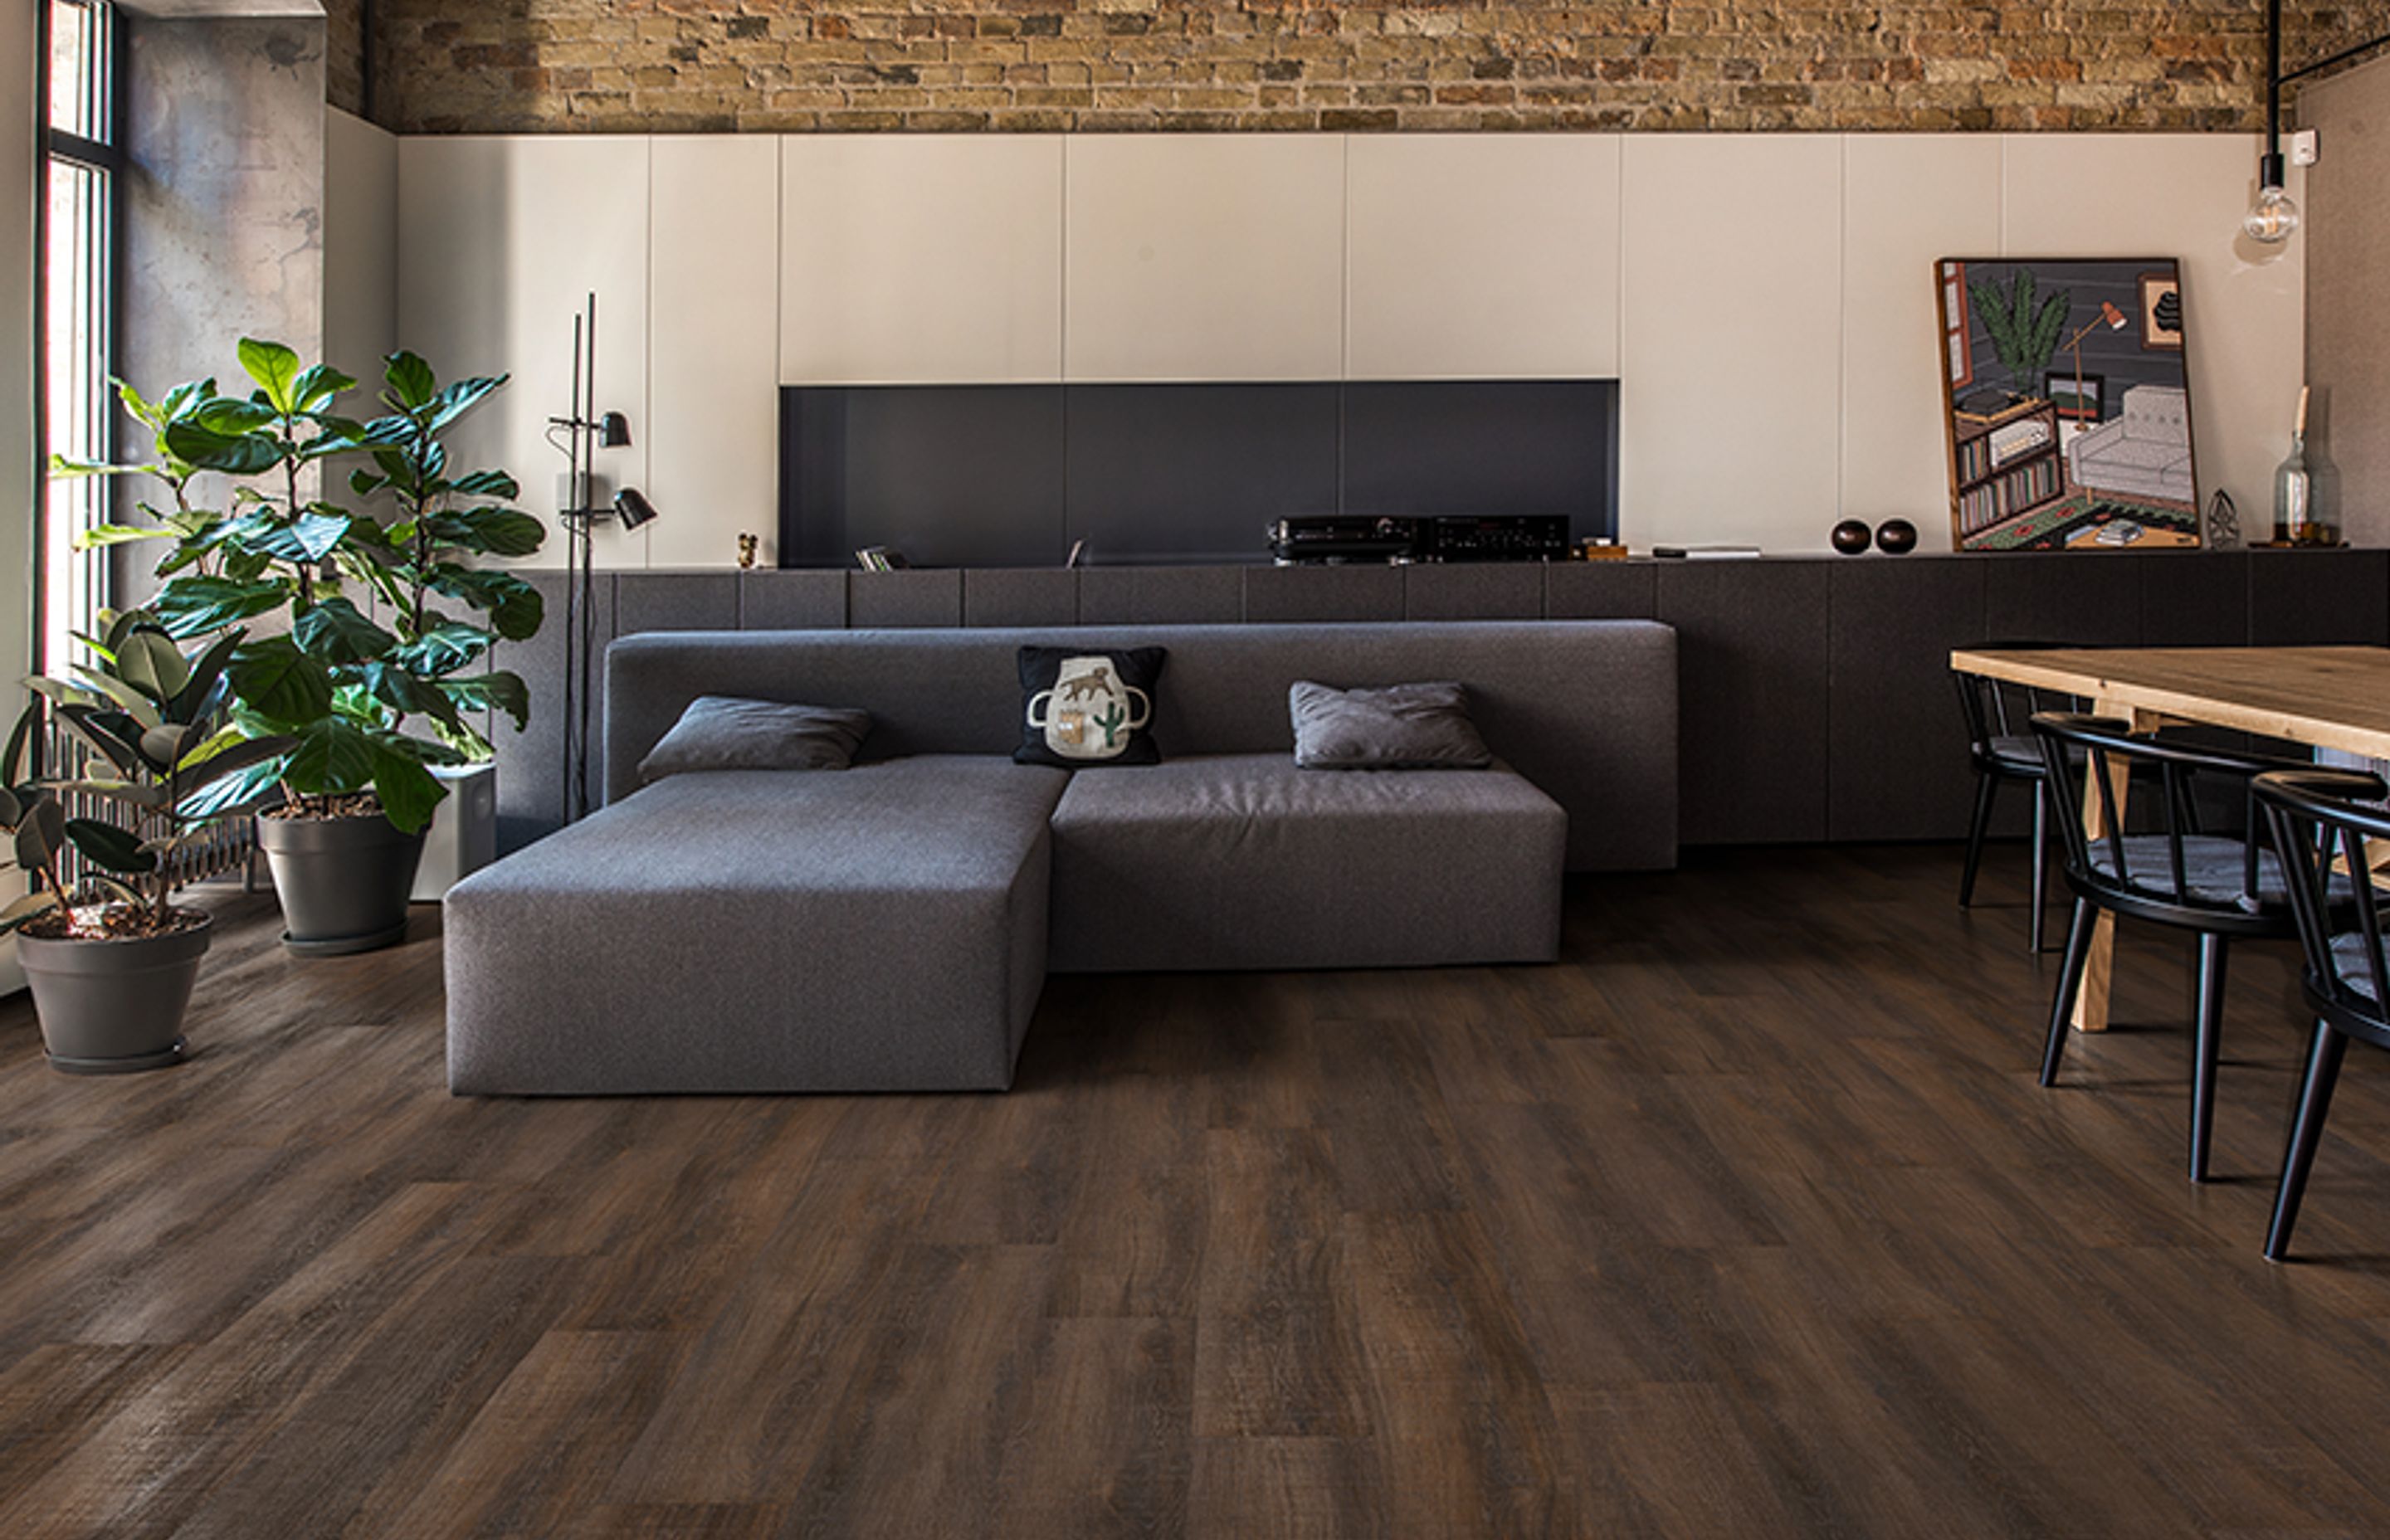 Available in eight styles, the Kährs Luxury Tiles timber-look range is based on the company's real wood options.